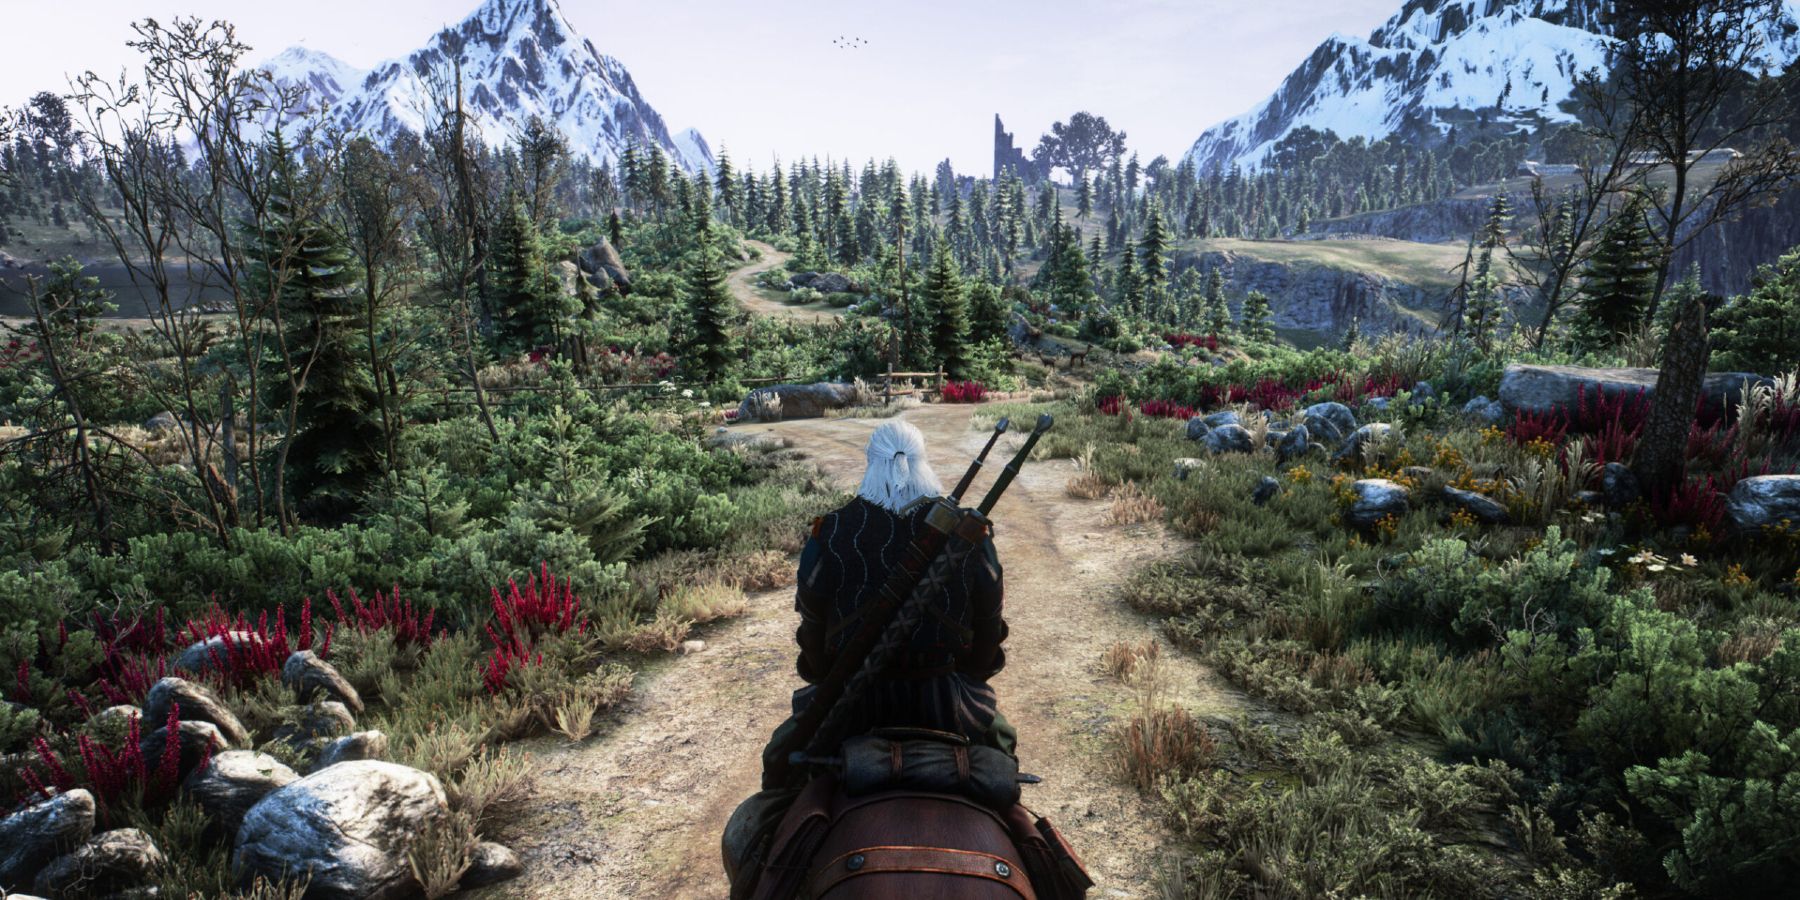 The Witcher 3: How To Upgrade PS4 To PS5 Version